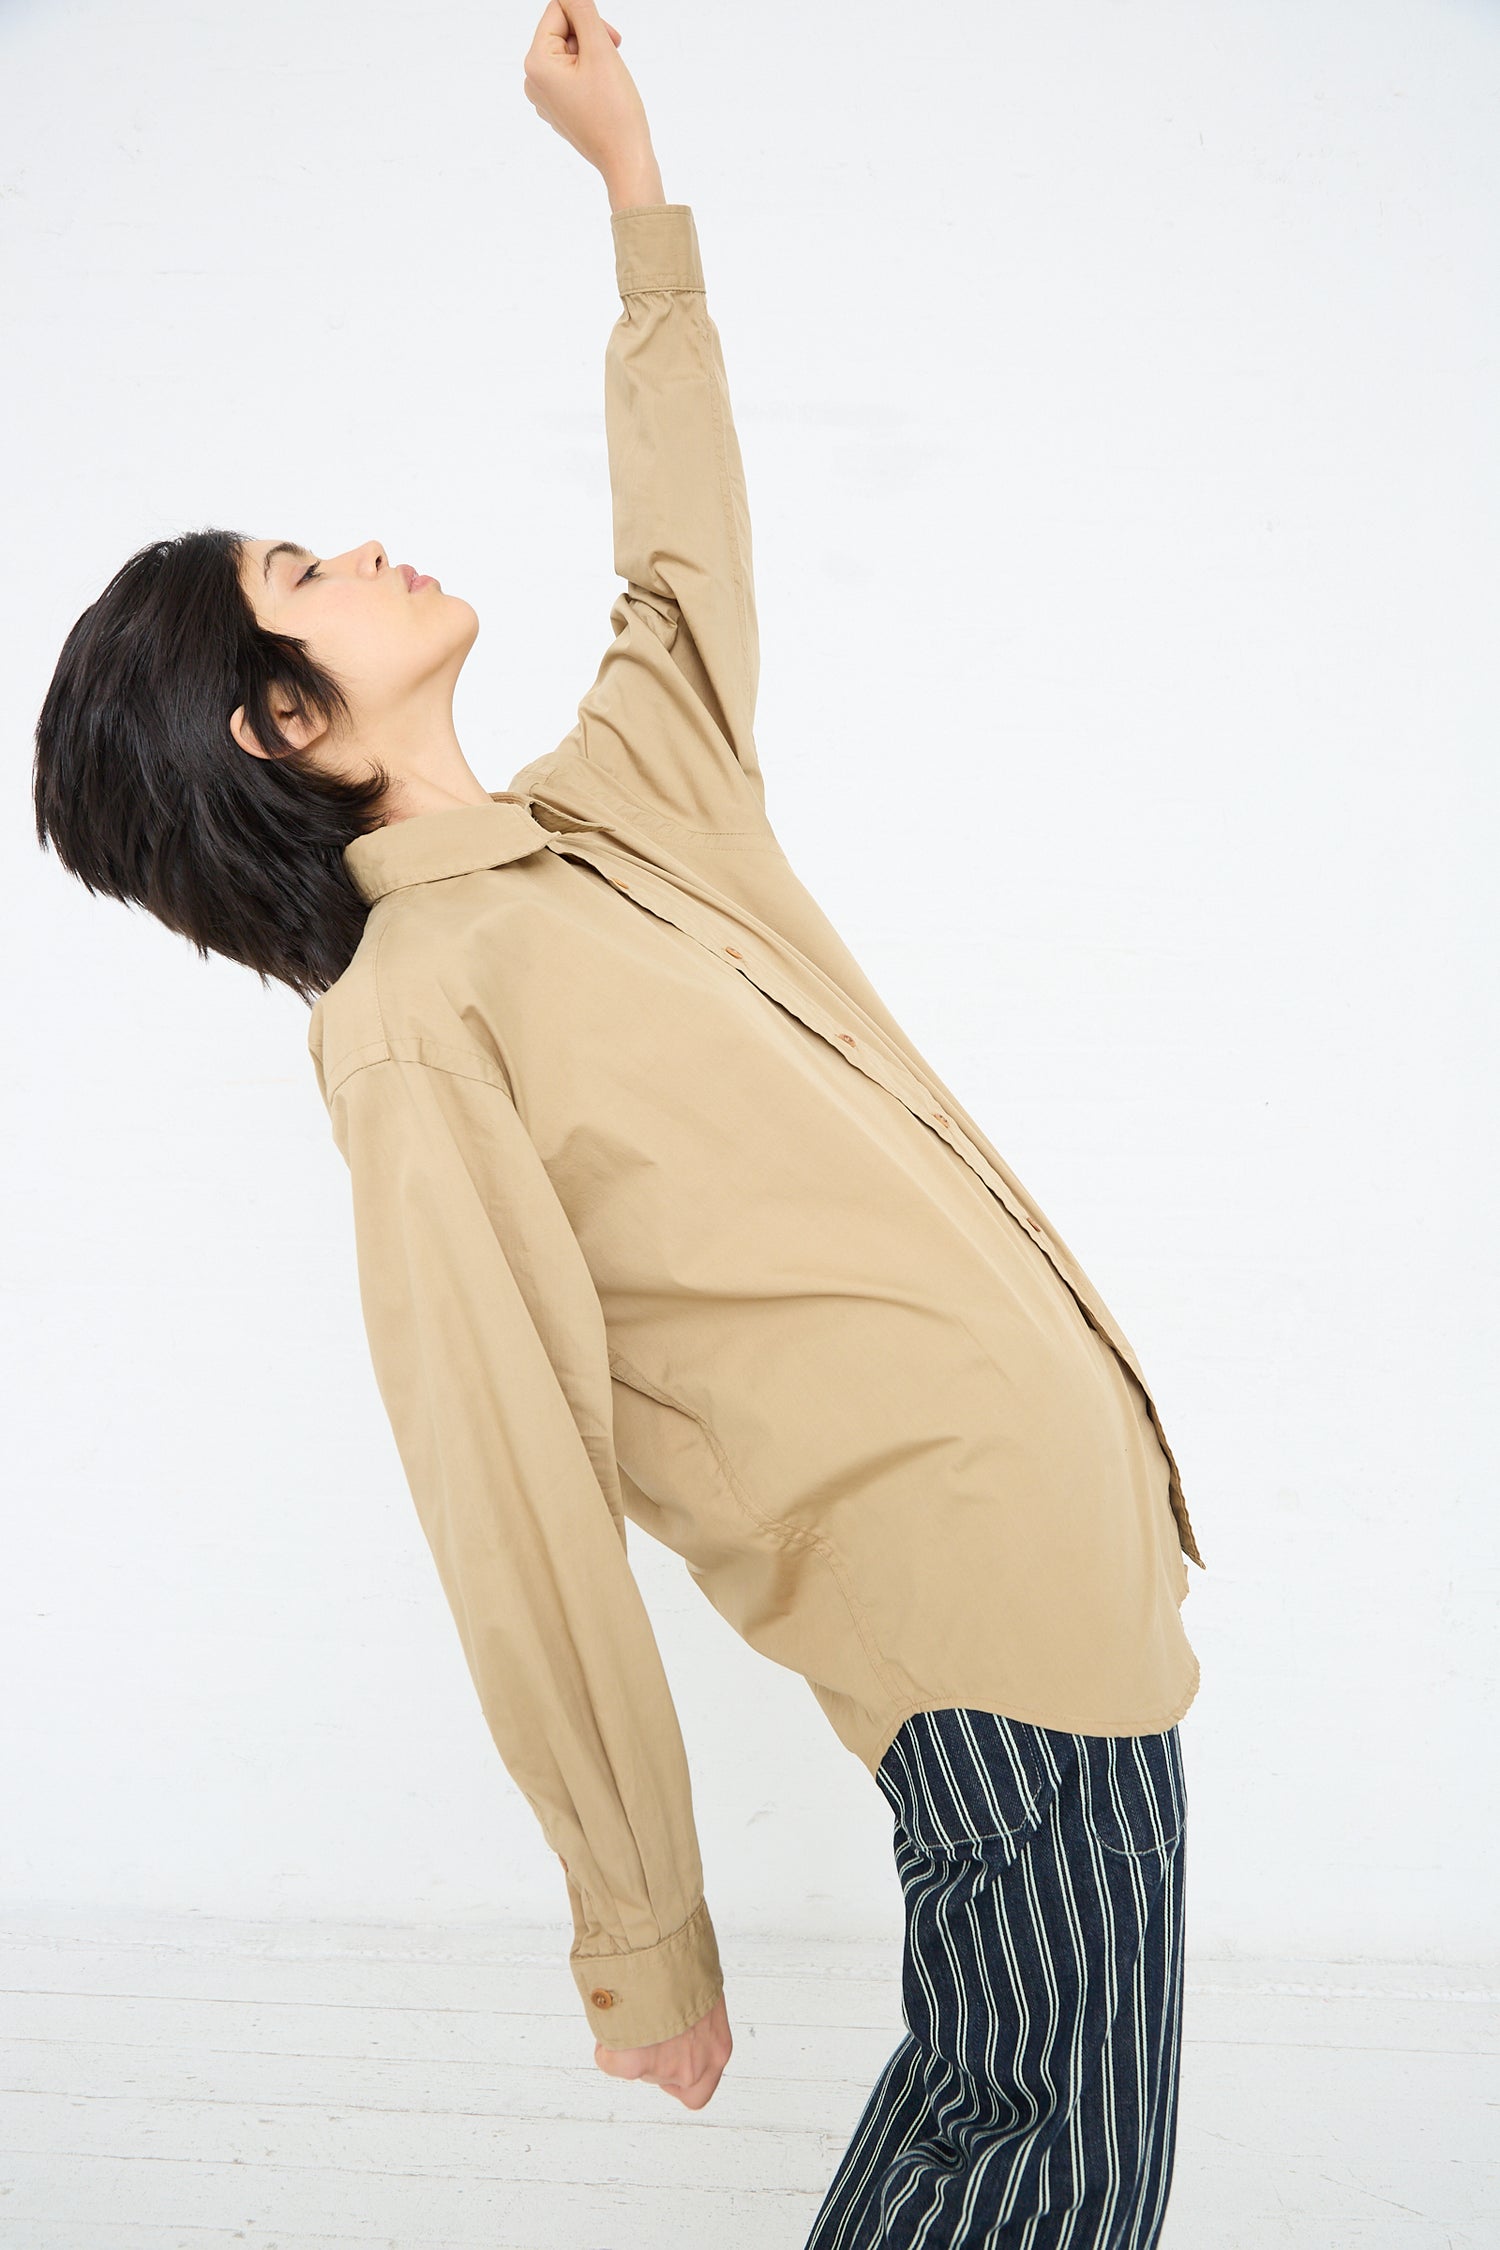 A person in a beige jacket and striped pants stretching one arm upwards while standing against a white background, donning an As Ever Largo Shirt in 40's Khaki.